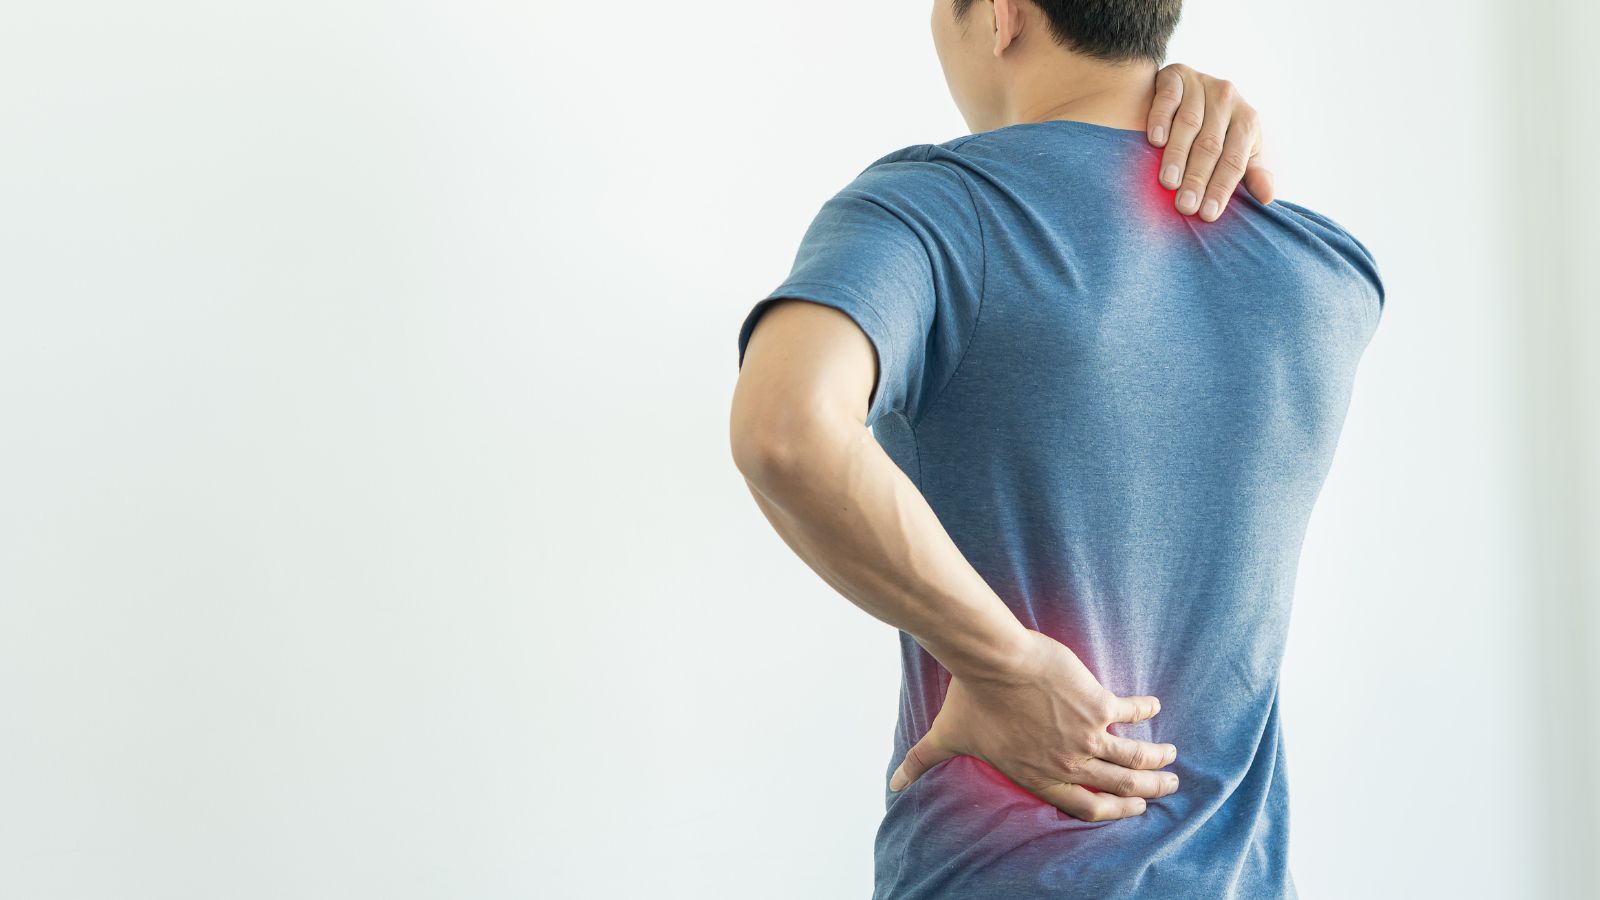 A young man feeling discomfort due to lower back pain is using his hands to massage his shoulders and lower back.